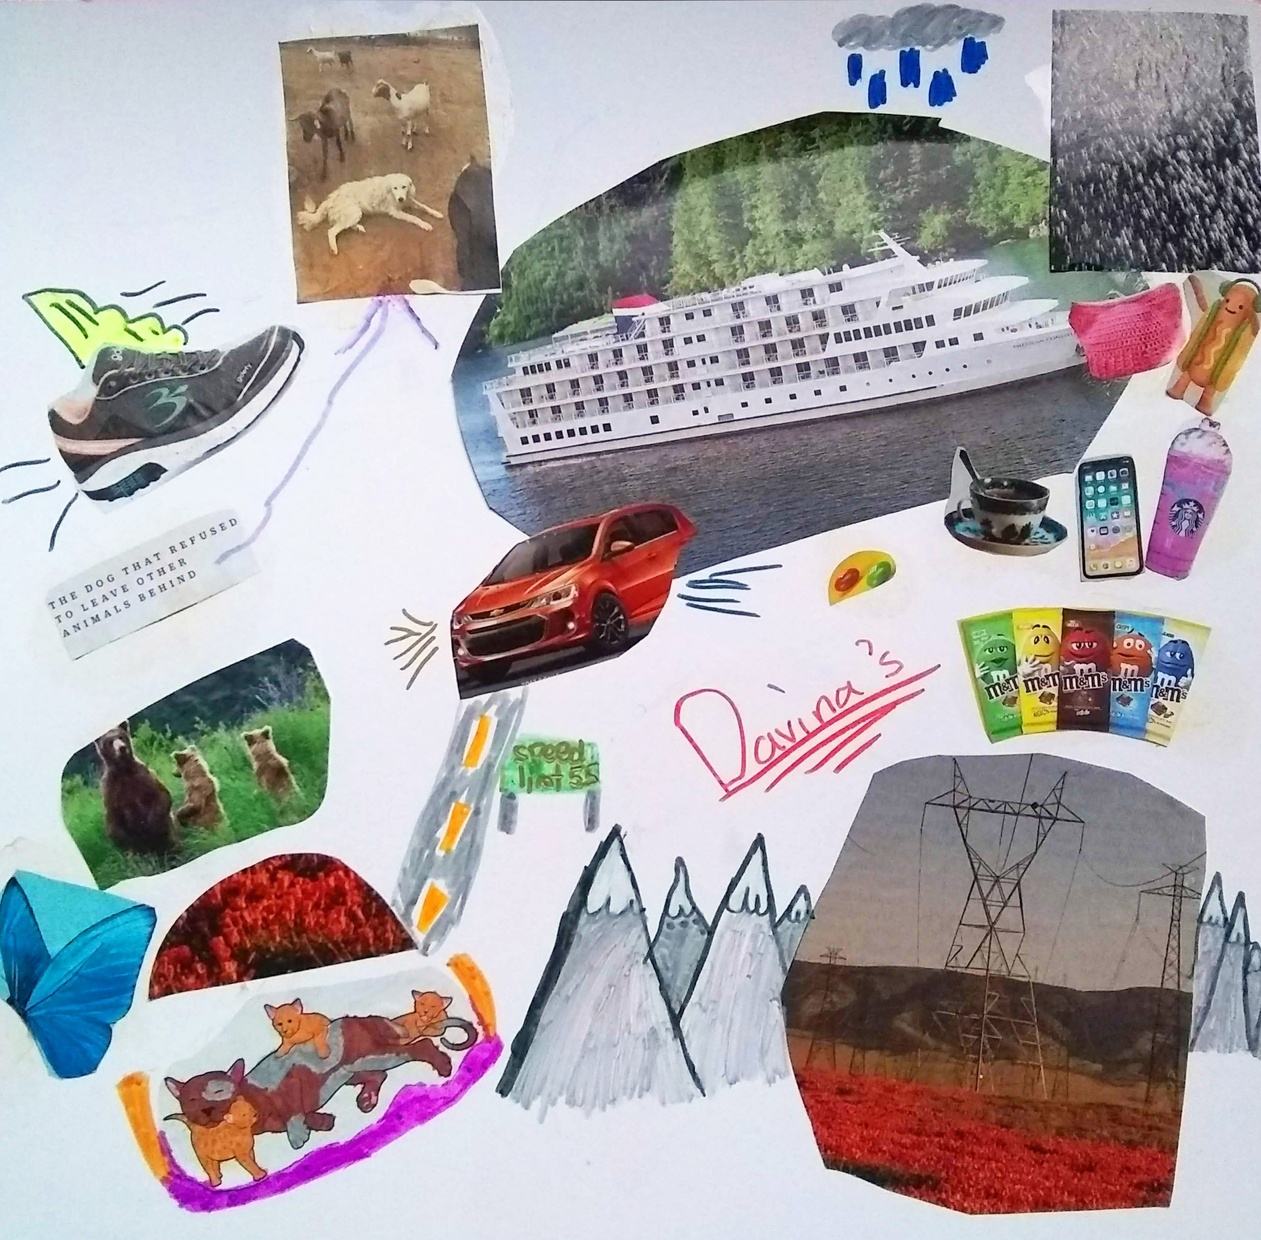 Collaged images cut out from magazines featuring candy, bears, cats, a ferry, and cars with "Davina's" written in red pencil on white paper.